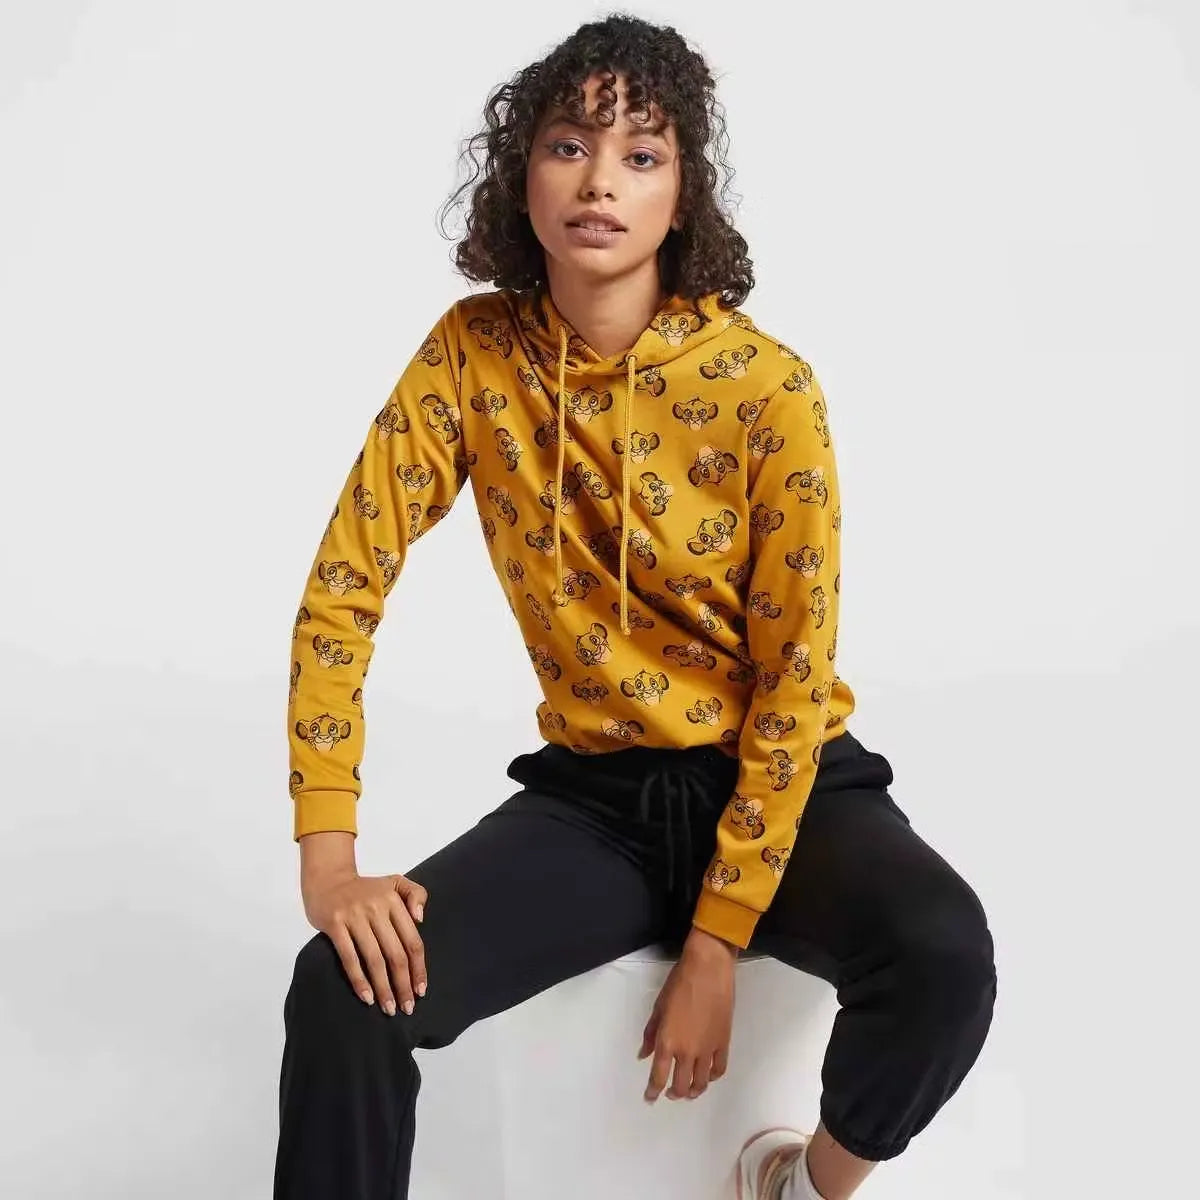 A woman wearing a hooded sweatshirt with a full-body print of The Lion King characters. Cozy up in style with the Max Lion King all-over print women's sweatshirt! Featuring a playful design and comfortable hoodie, this sweatshirt is perfect for casual wear. Shop now on Dubailisit!